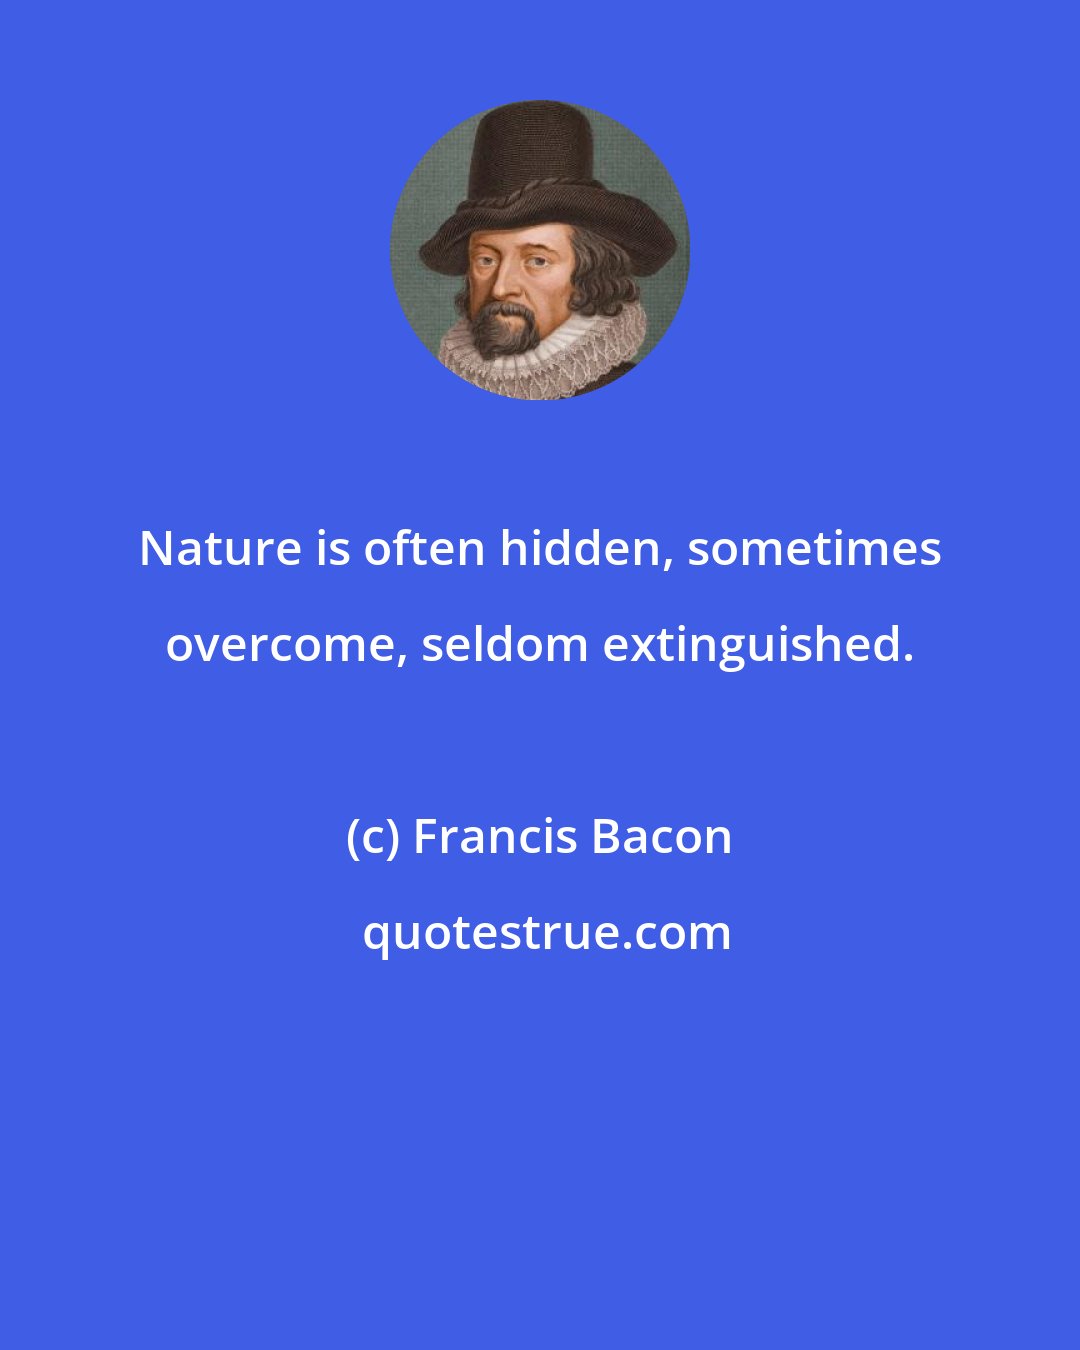 Francis Bacon: Nature is often hidden, sometimes overcome, seldom extinguished.